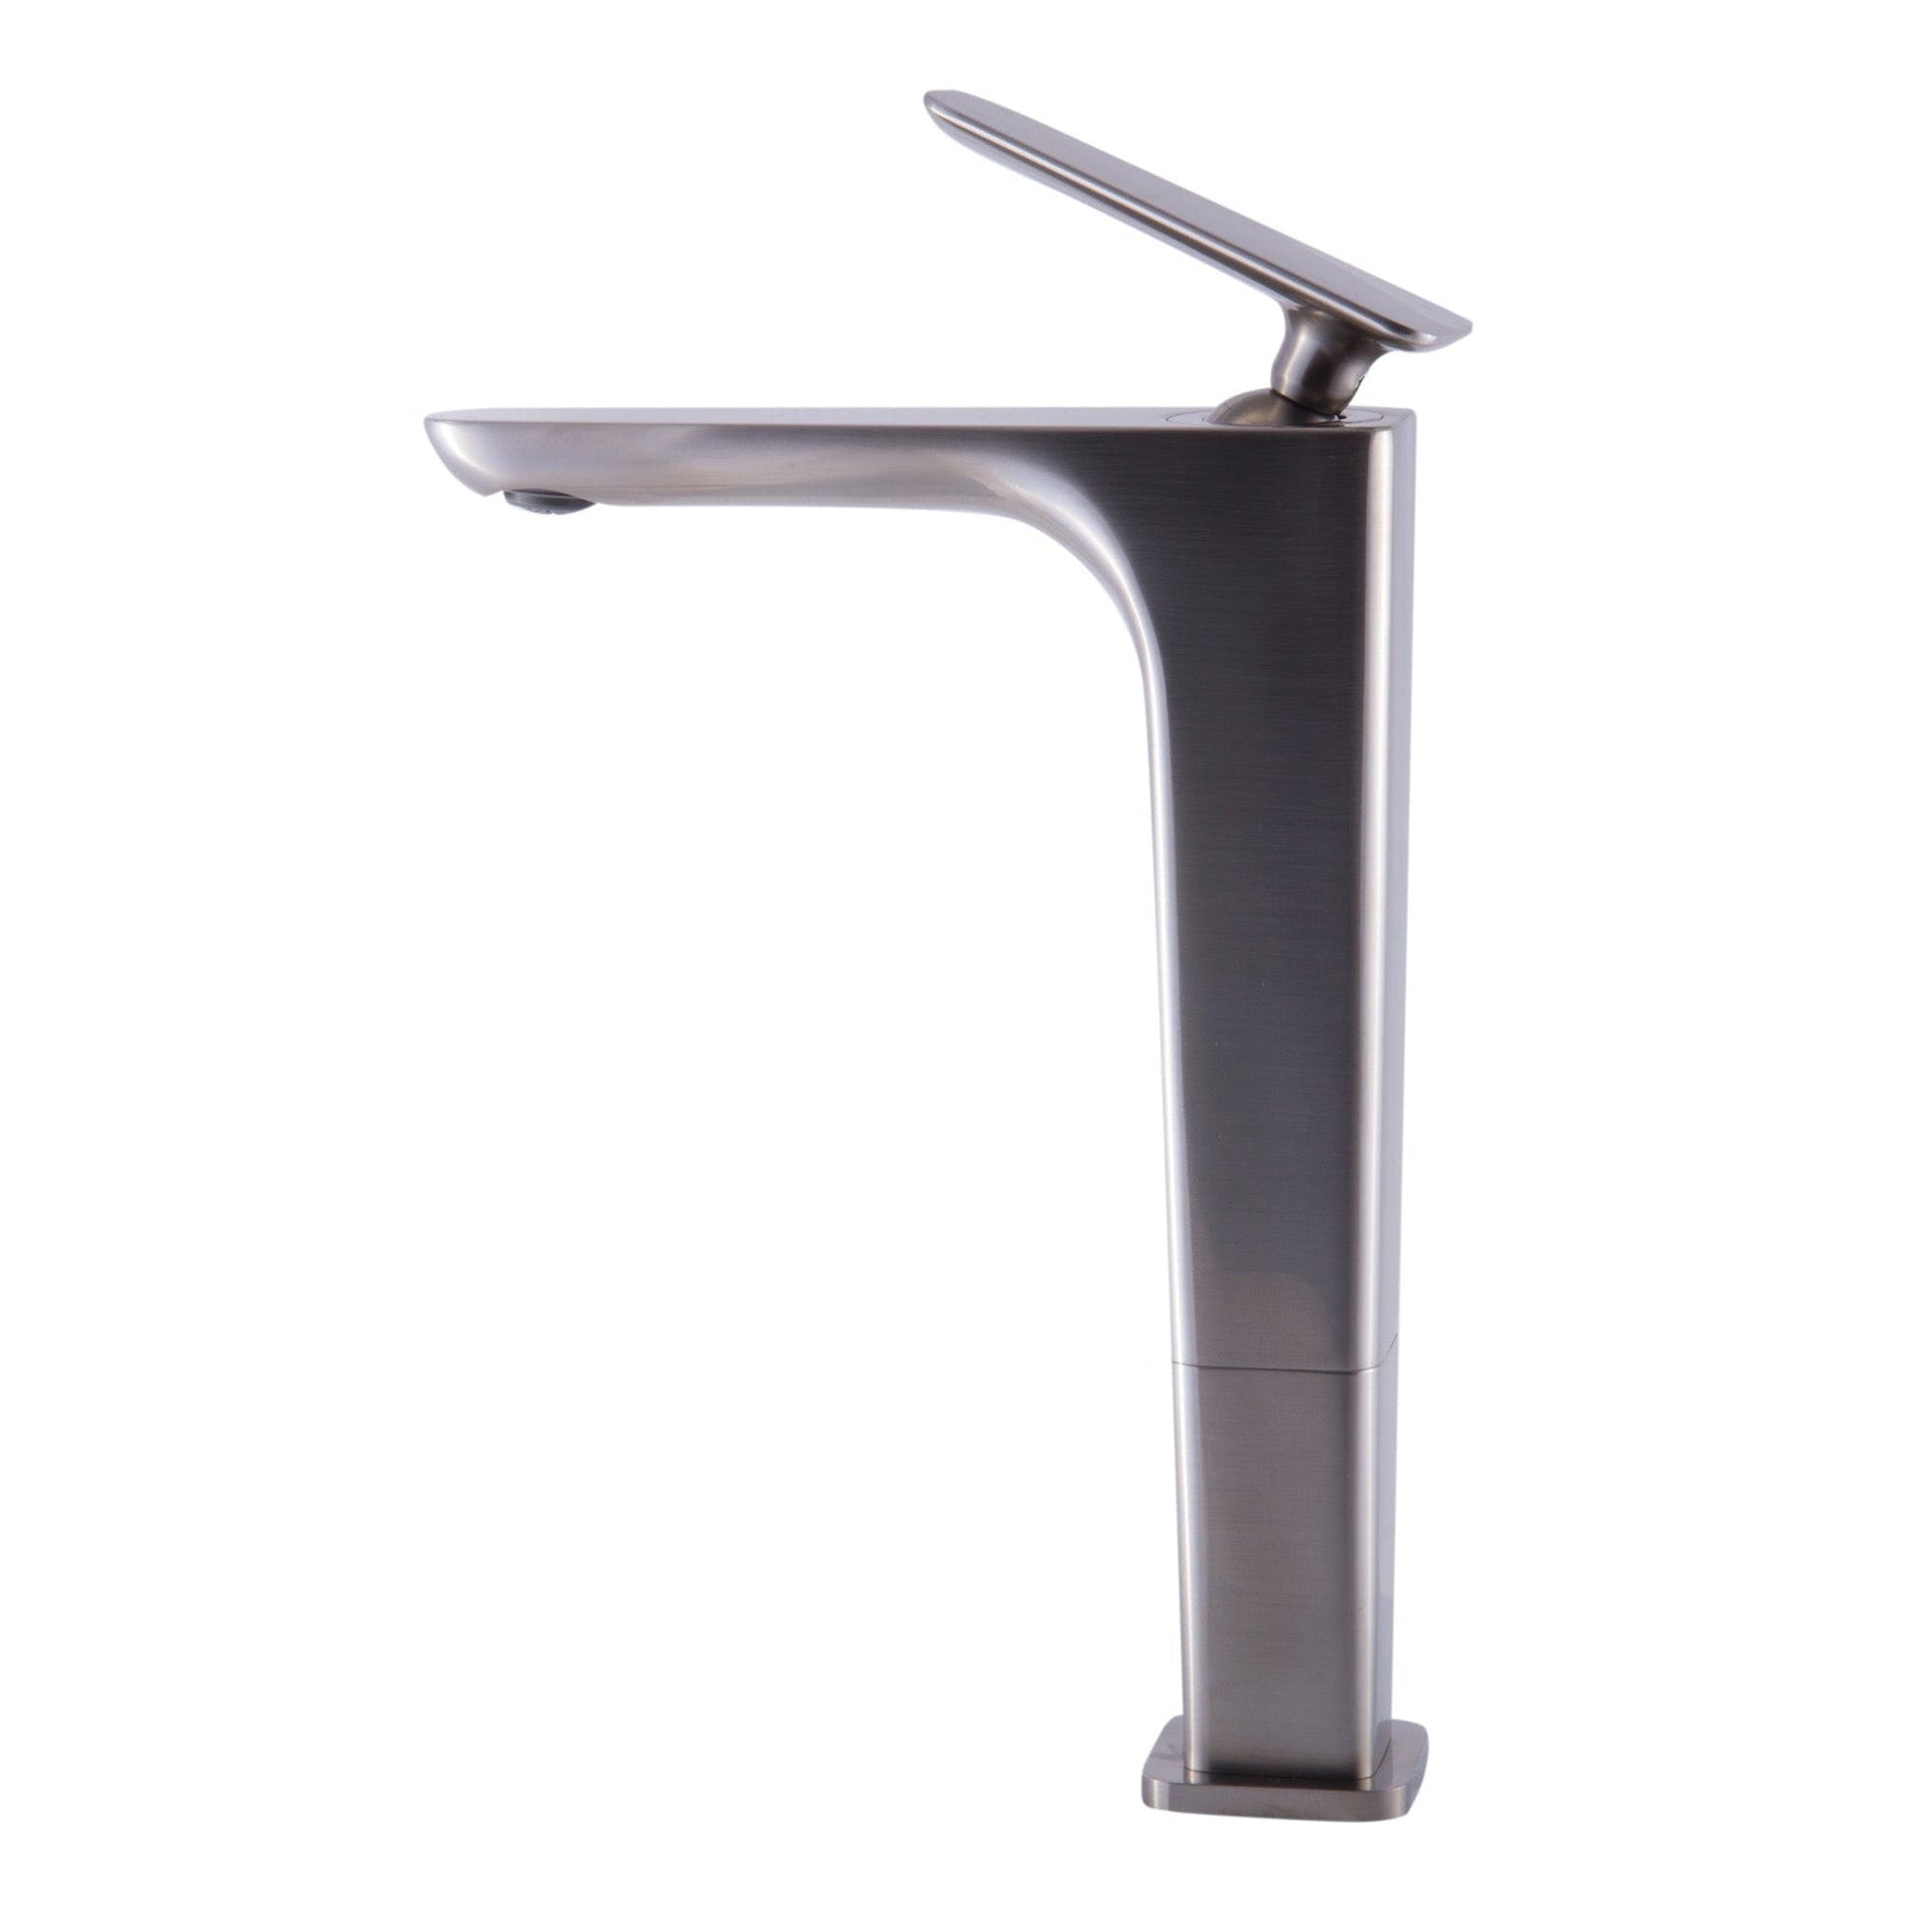 ALFI Brand AB1778-BN Brushed Nickel Vessel Spout Brass Bathroom Sink Faucet With Single Lever